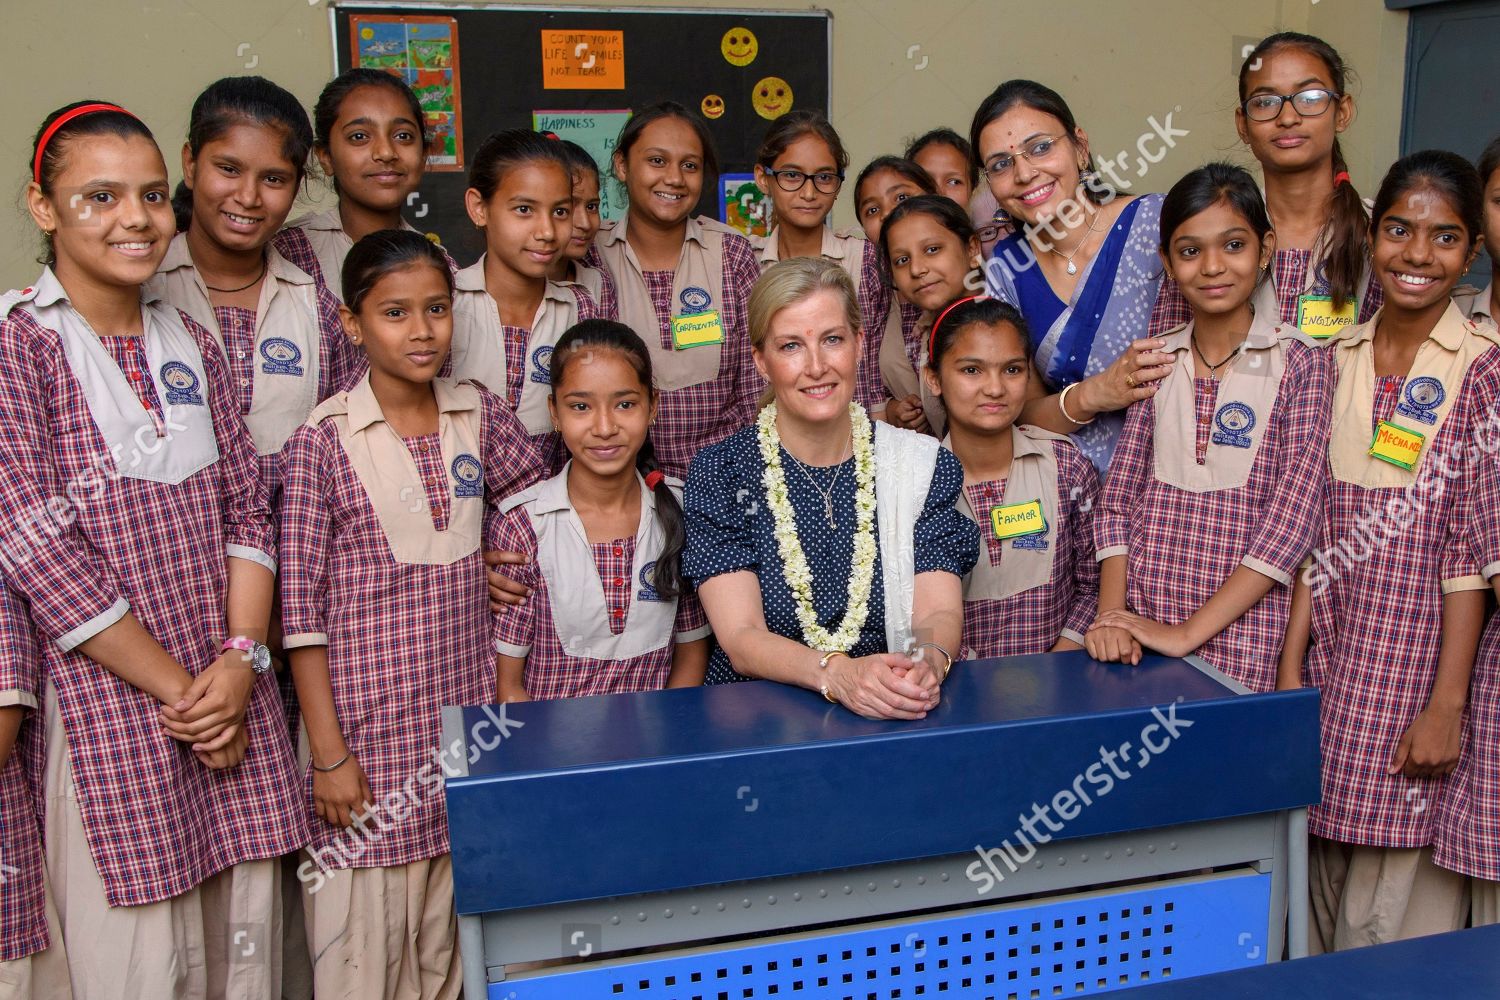 sophie-countess-of-wessex-visit-to-india-shutterstock-editorial-10227195aa.jpg